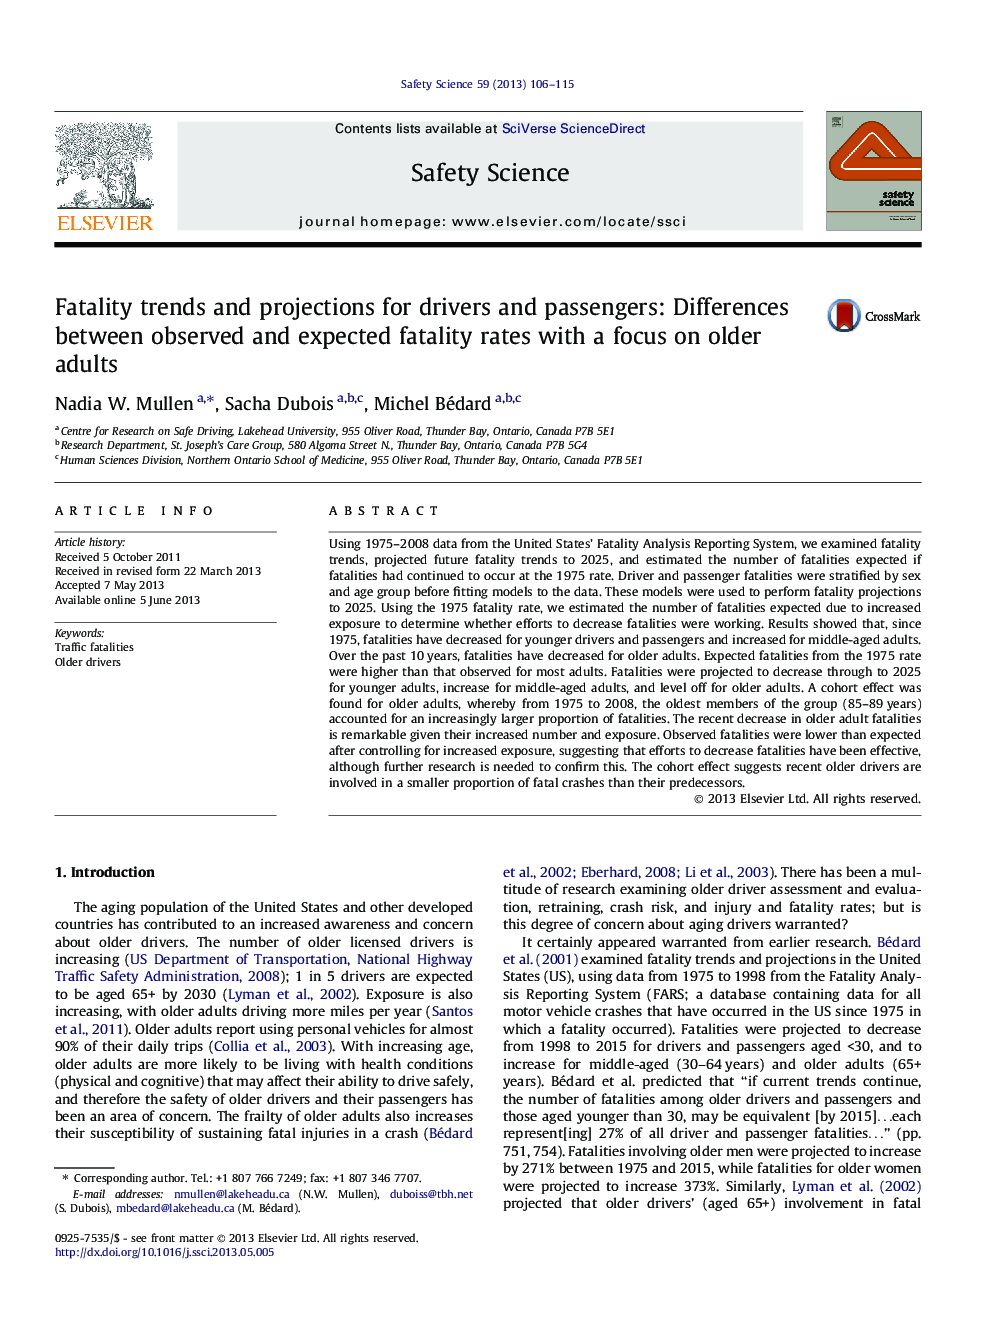 Fatality trends and projections for drivers and passengers: Differences between observed and expected fatality rates with a focus on older adults